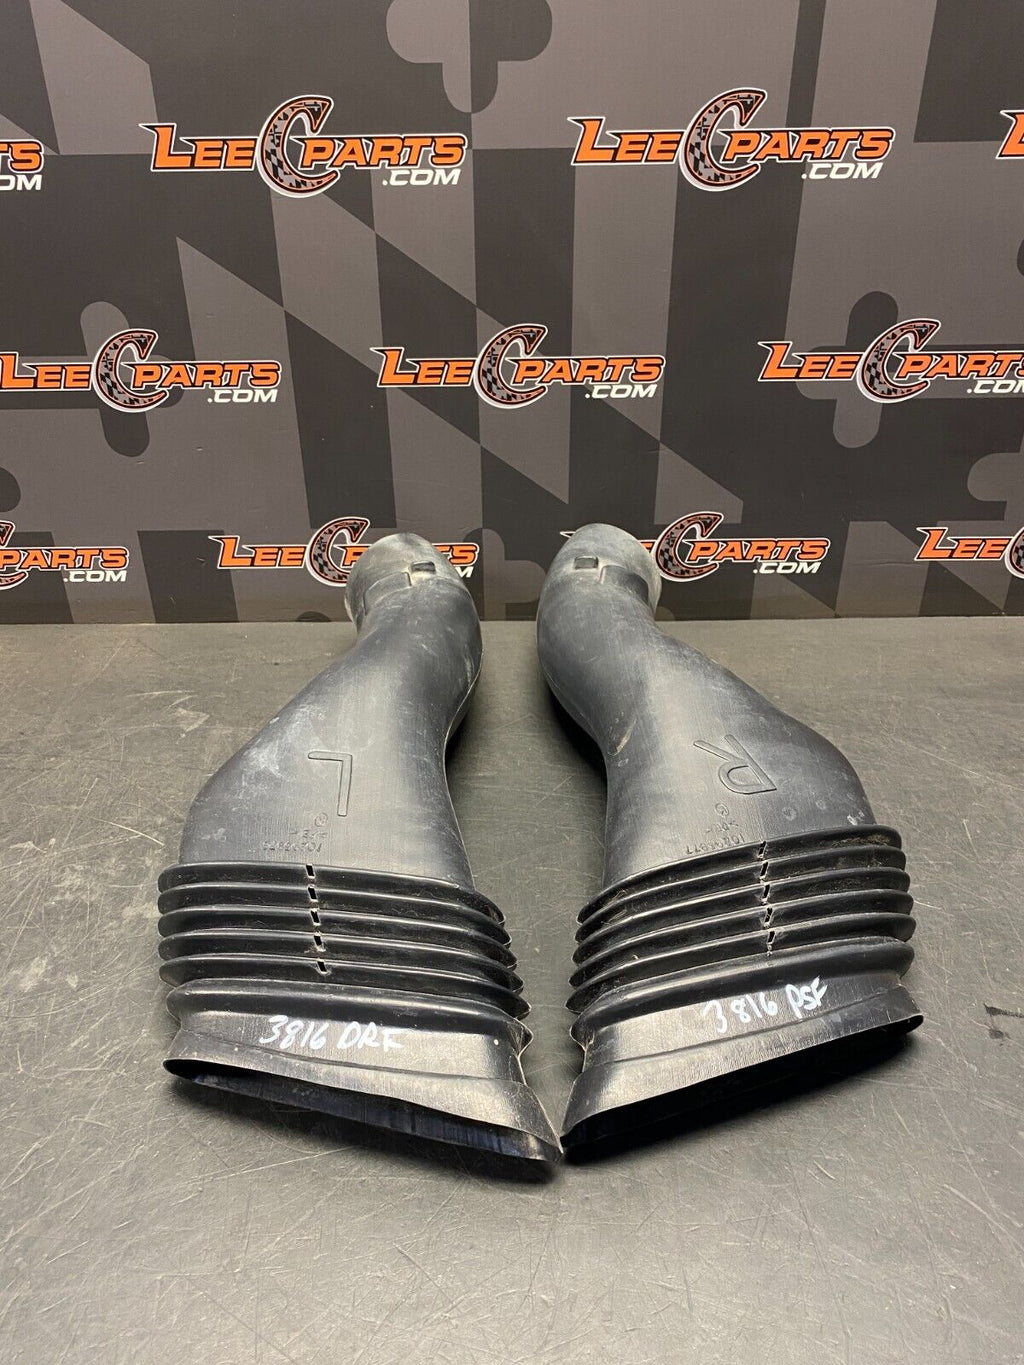 2003 CORVETTE C5Z06 OEM FRONT BRAKE DUCTS PAIR DR PS USED 48K MILES